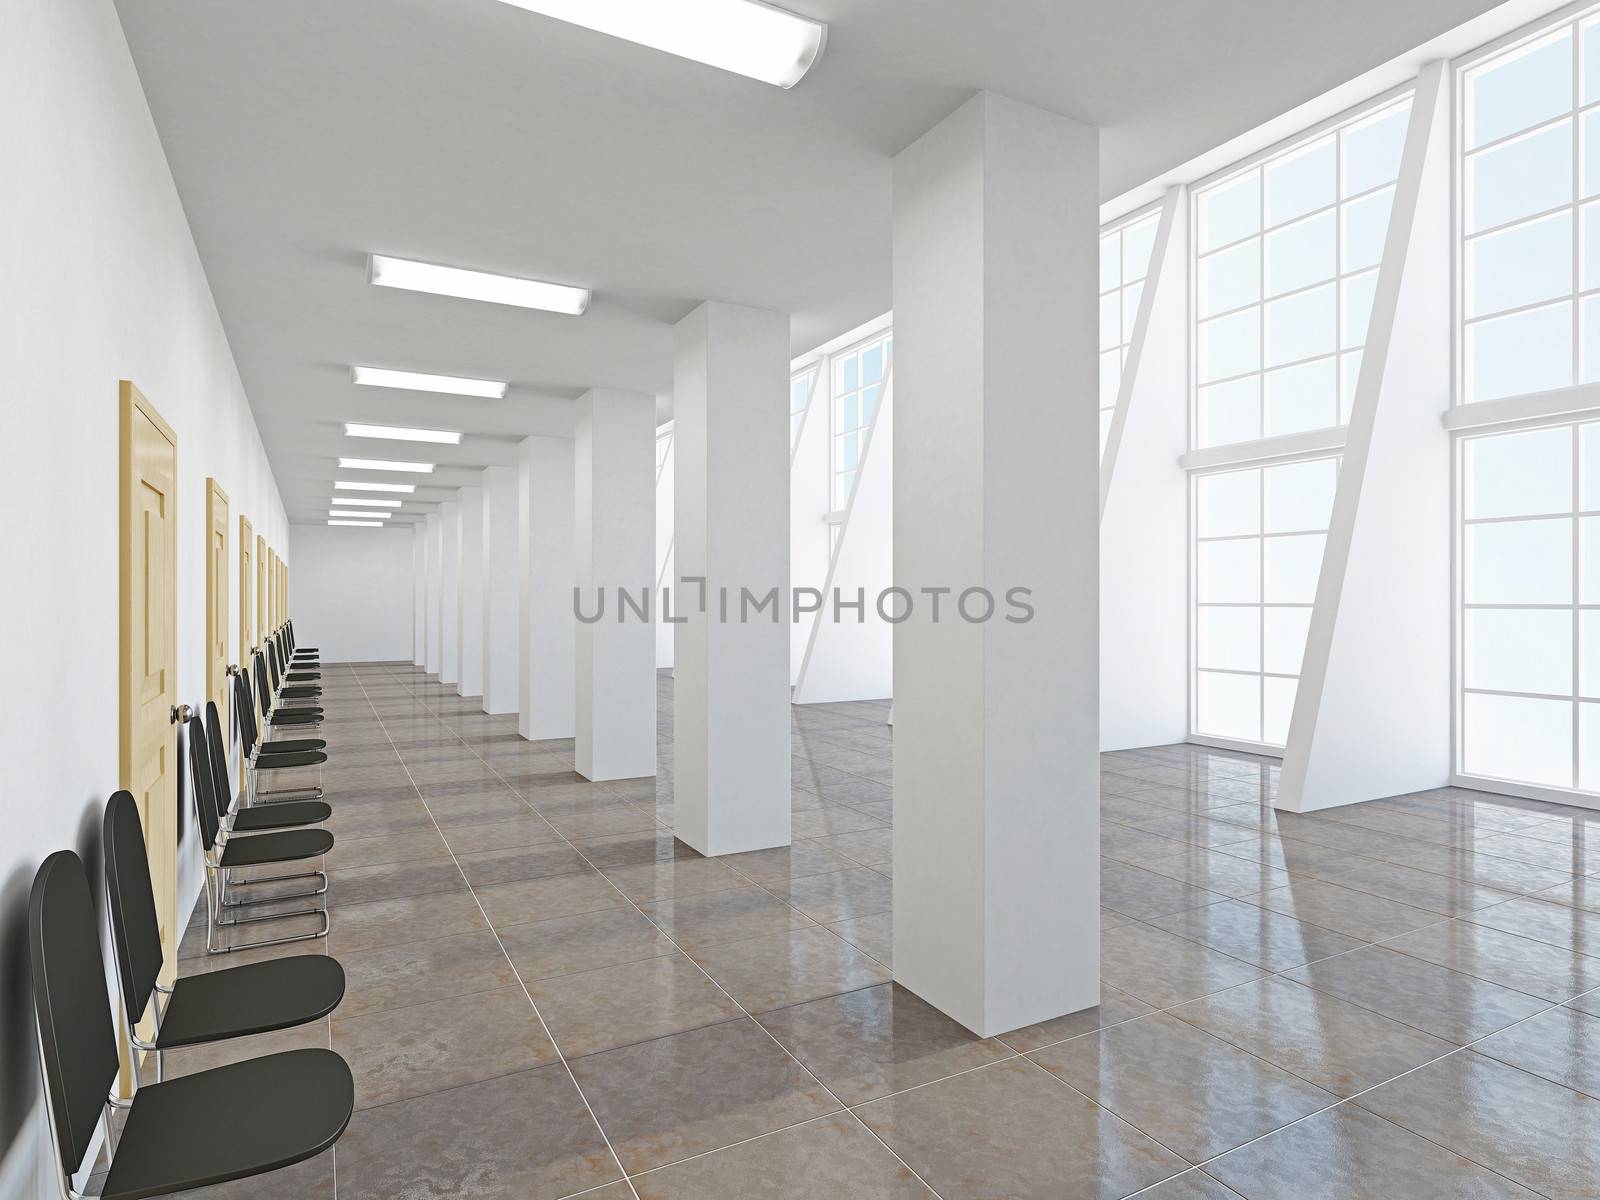 The empty long corridor with large windows